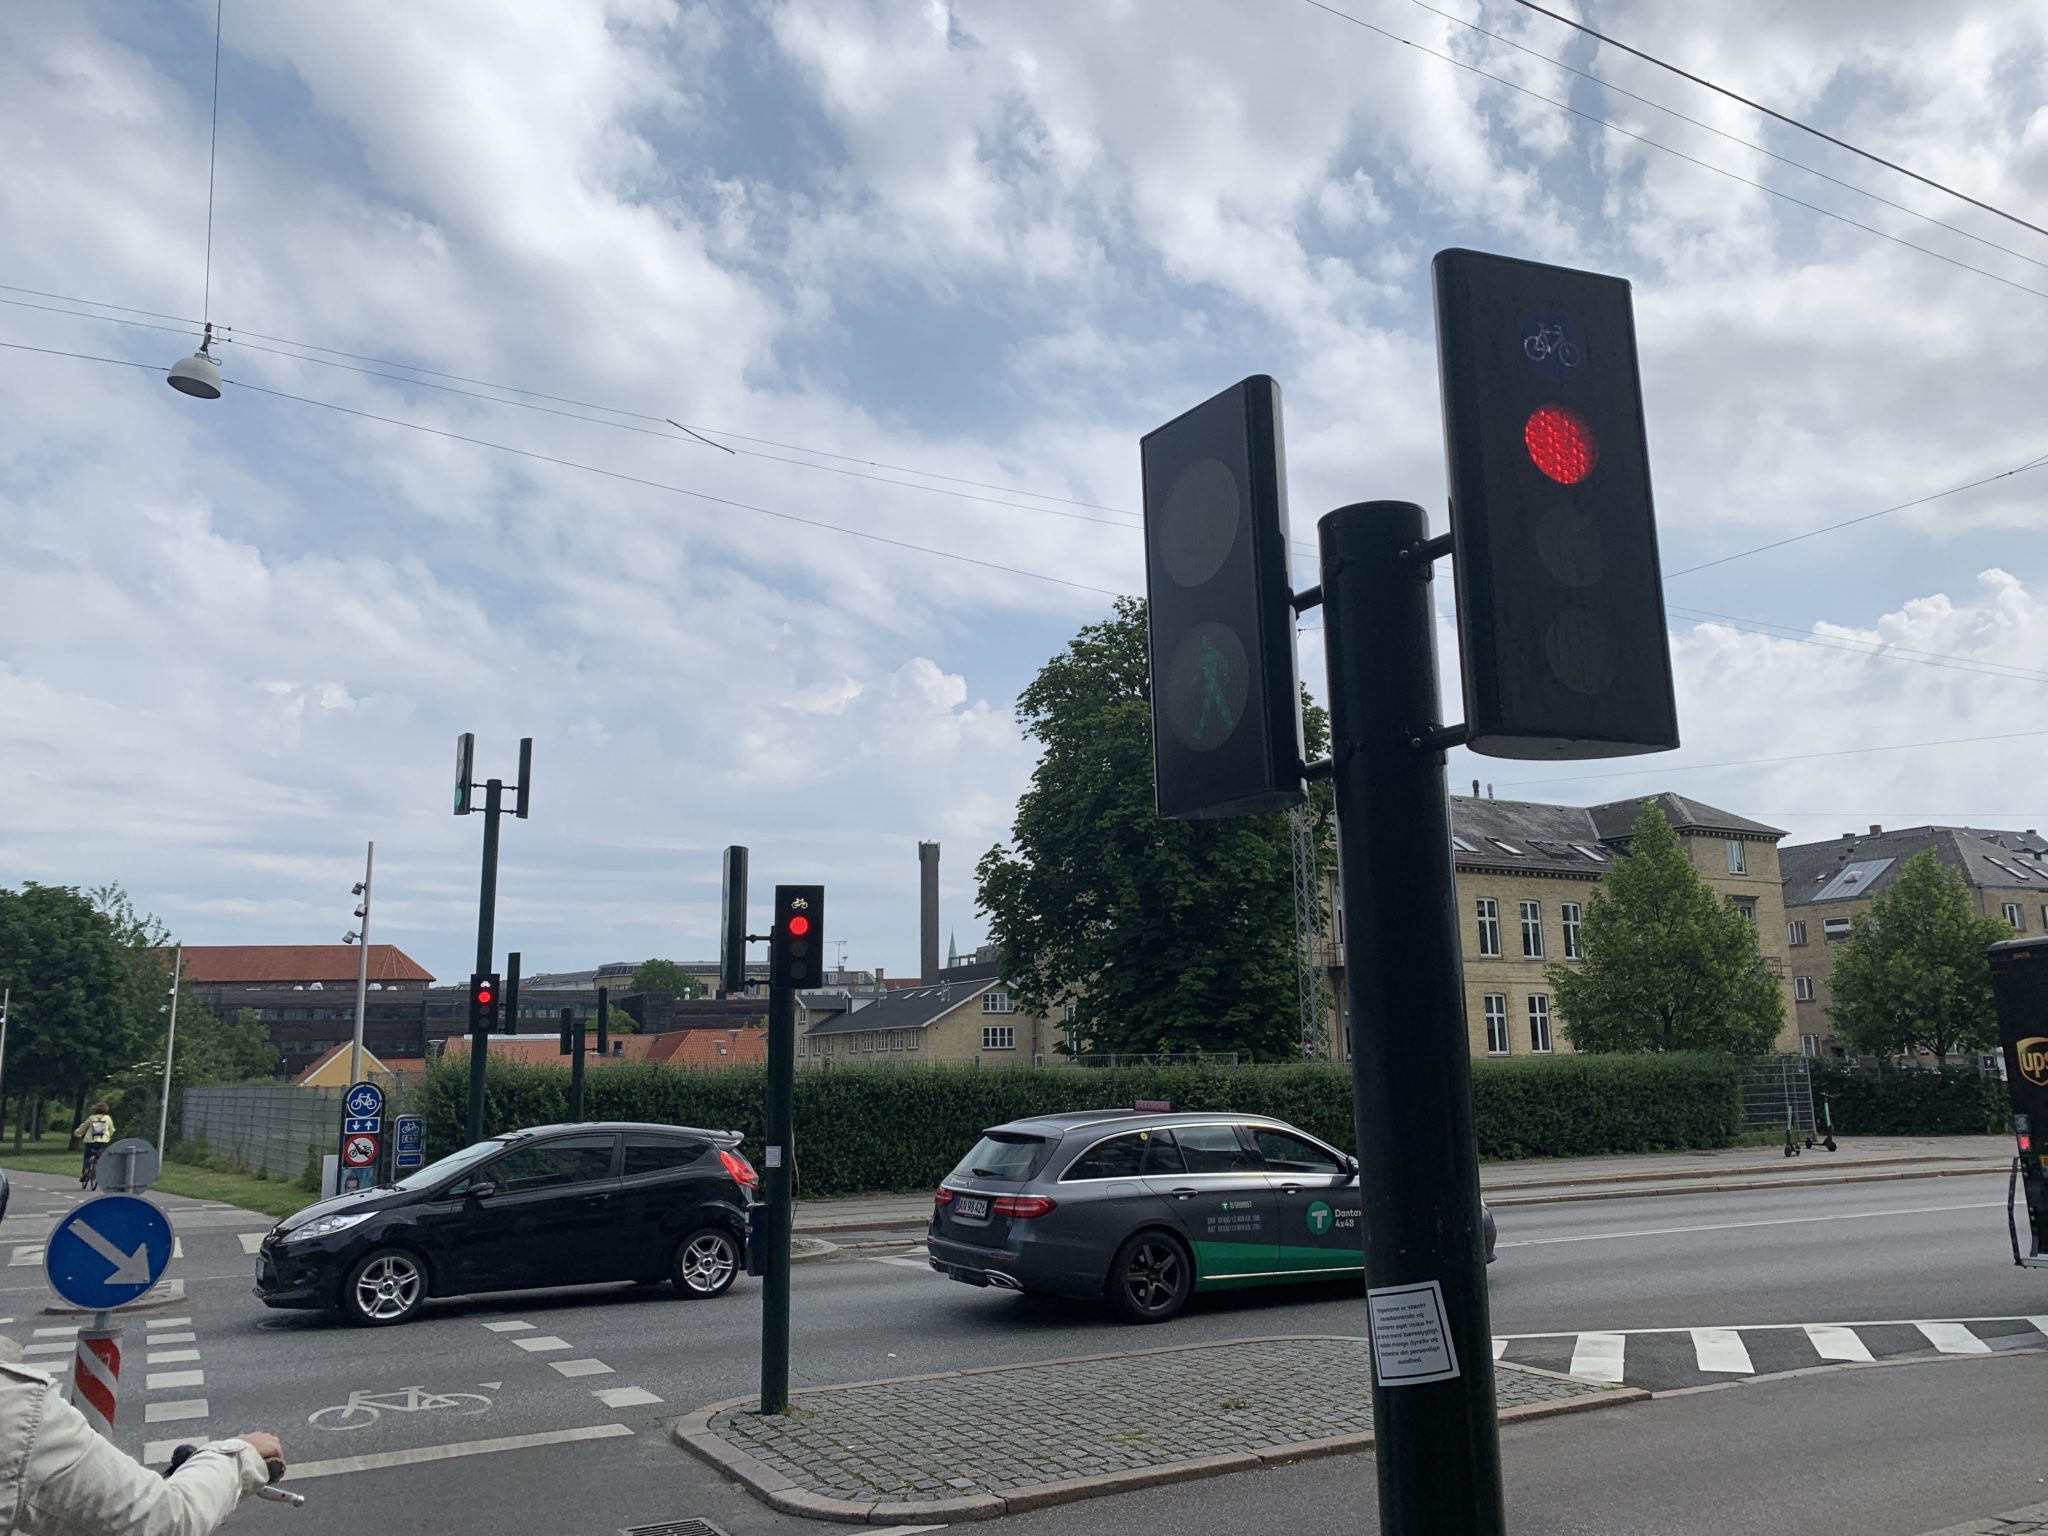 A red light specifically for bicyclists at an intersection.